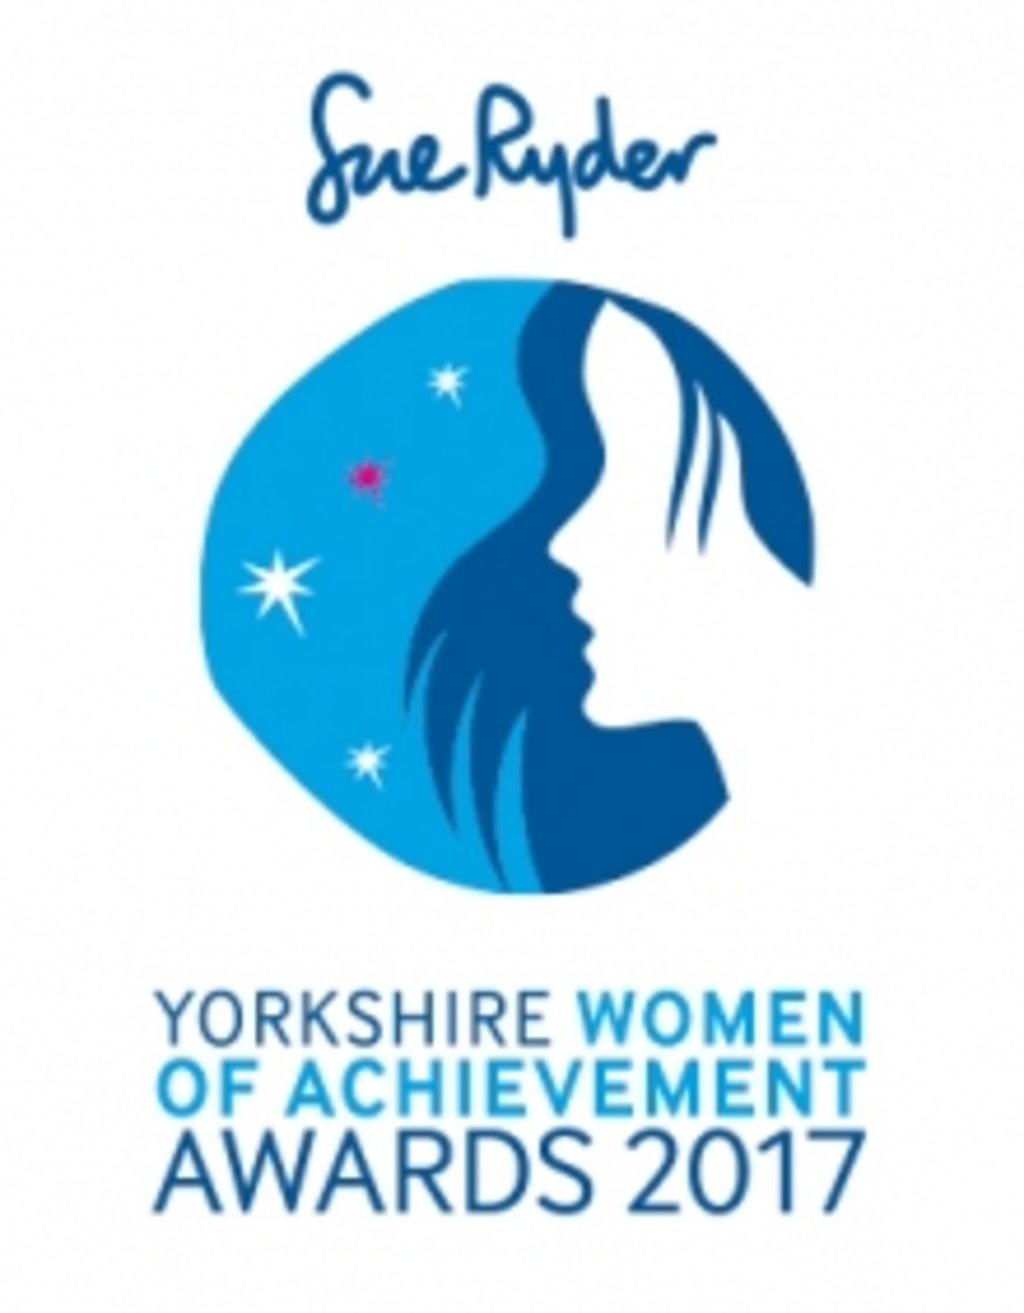 Companion Stairlifts proud to support Sue Ryder Yorkshire Women of Achievement Awards 2017